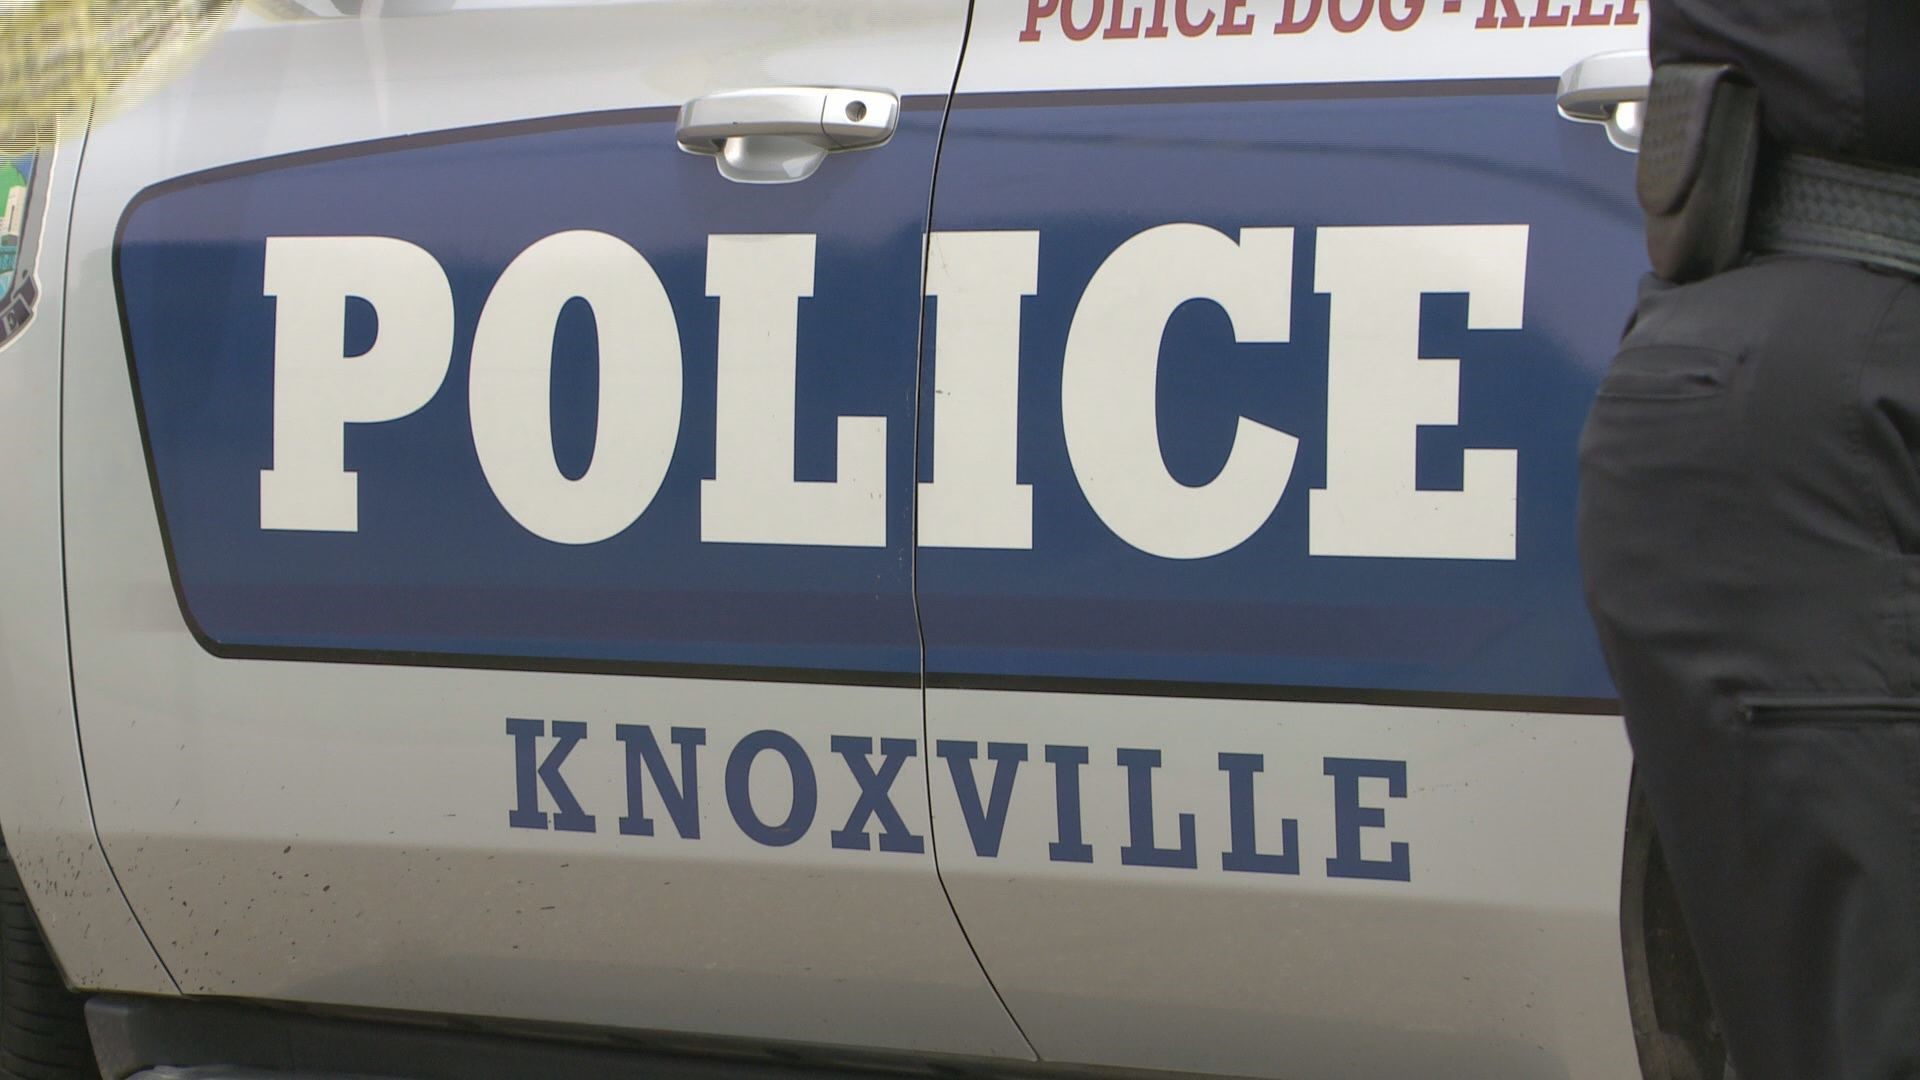 A suspect has not been arrested or charged yet, the Knoxville Police Department said.